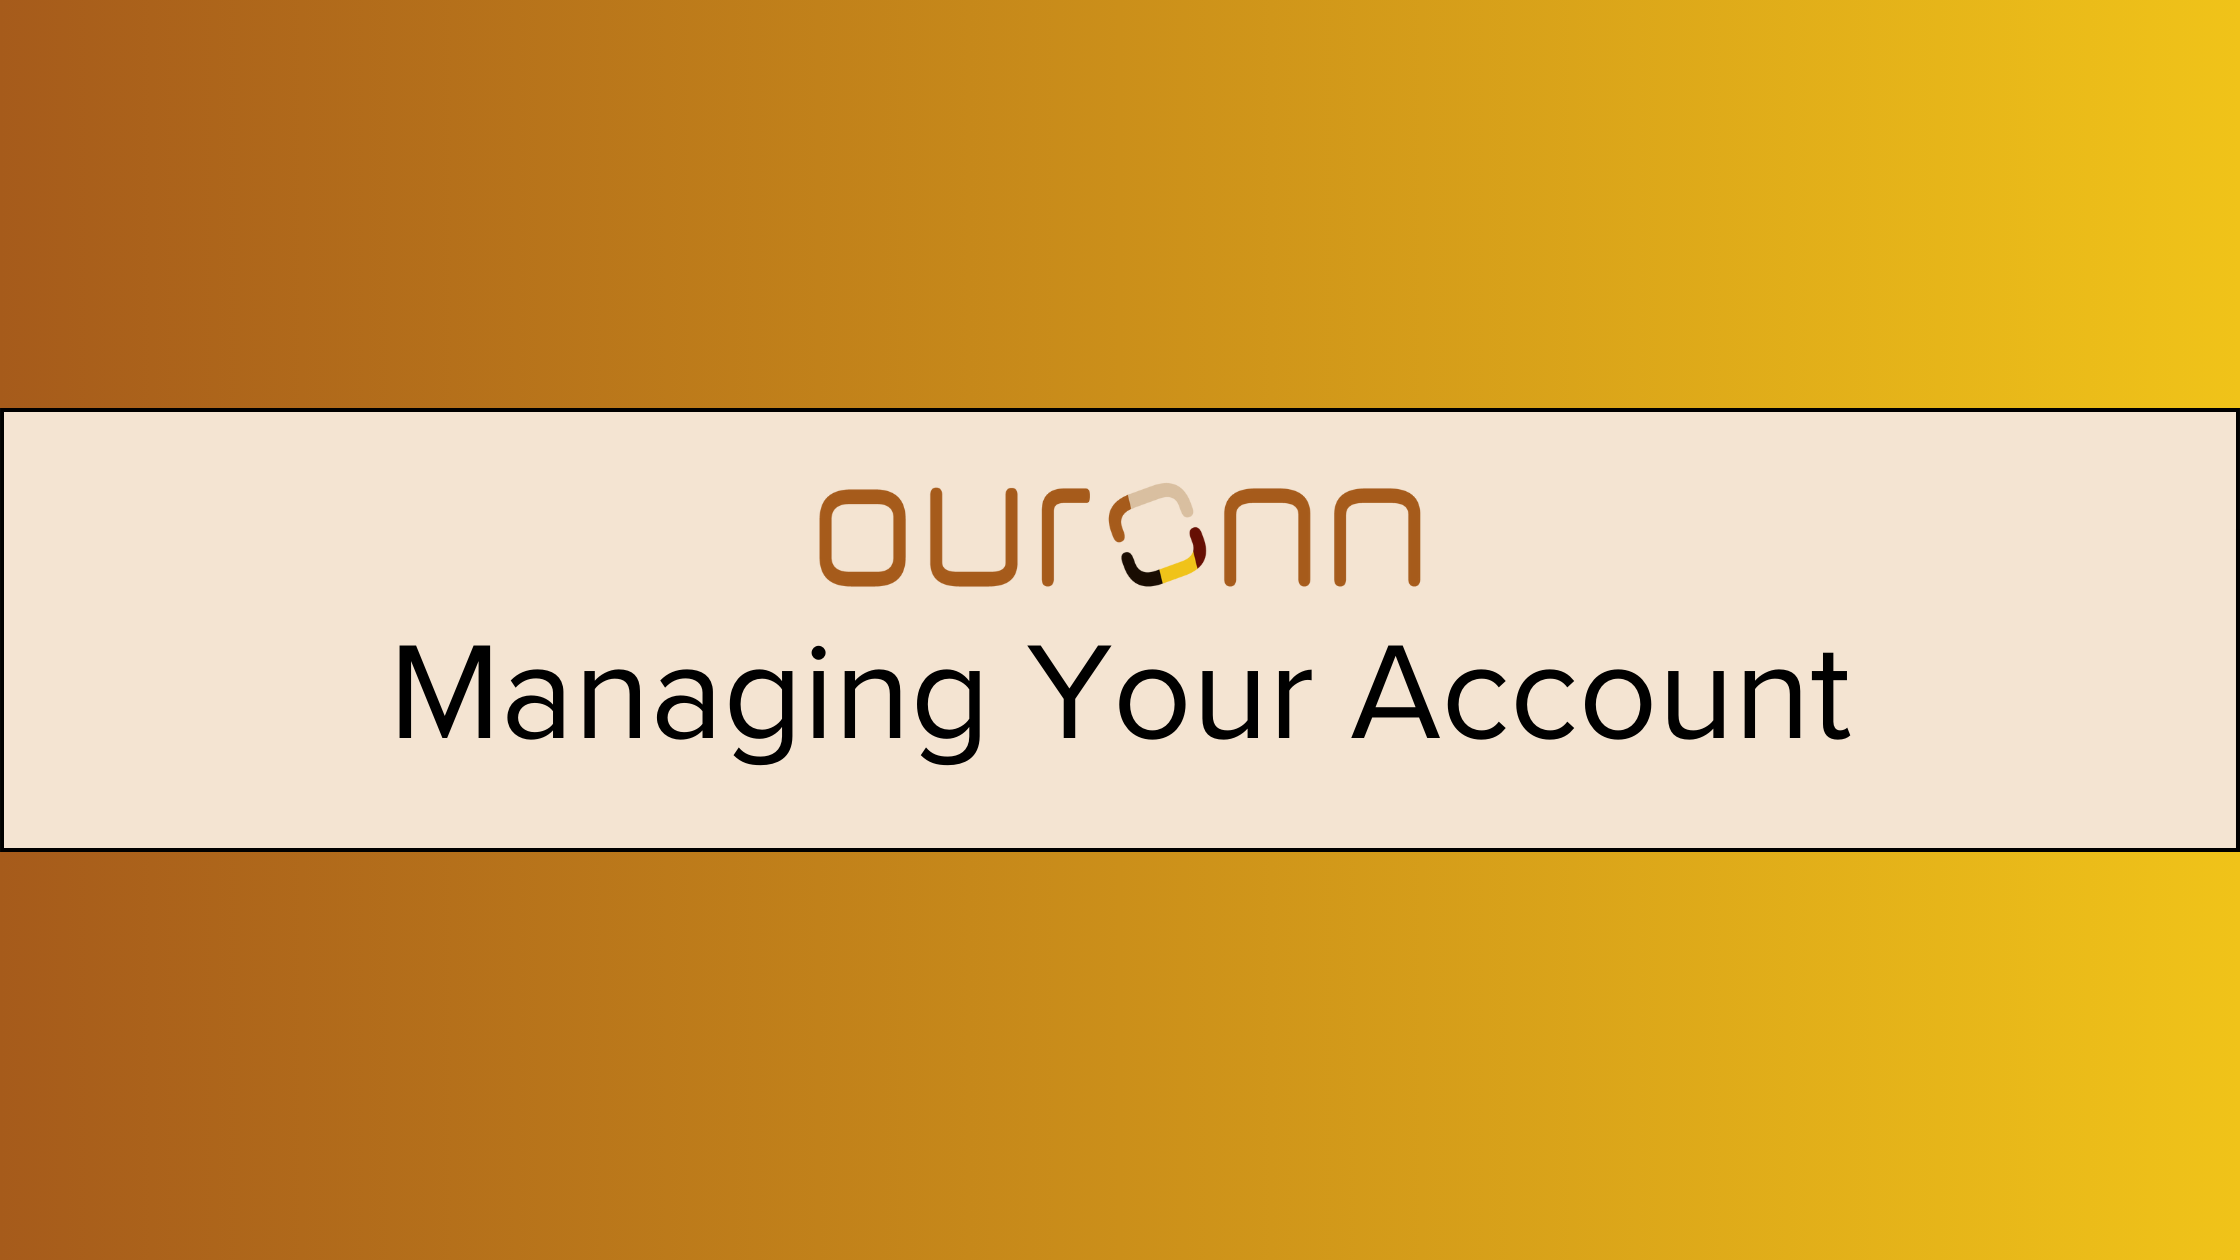 "Managing Your Account" Cover Image